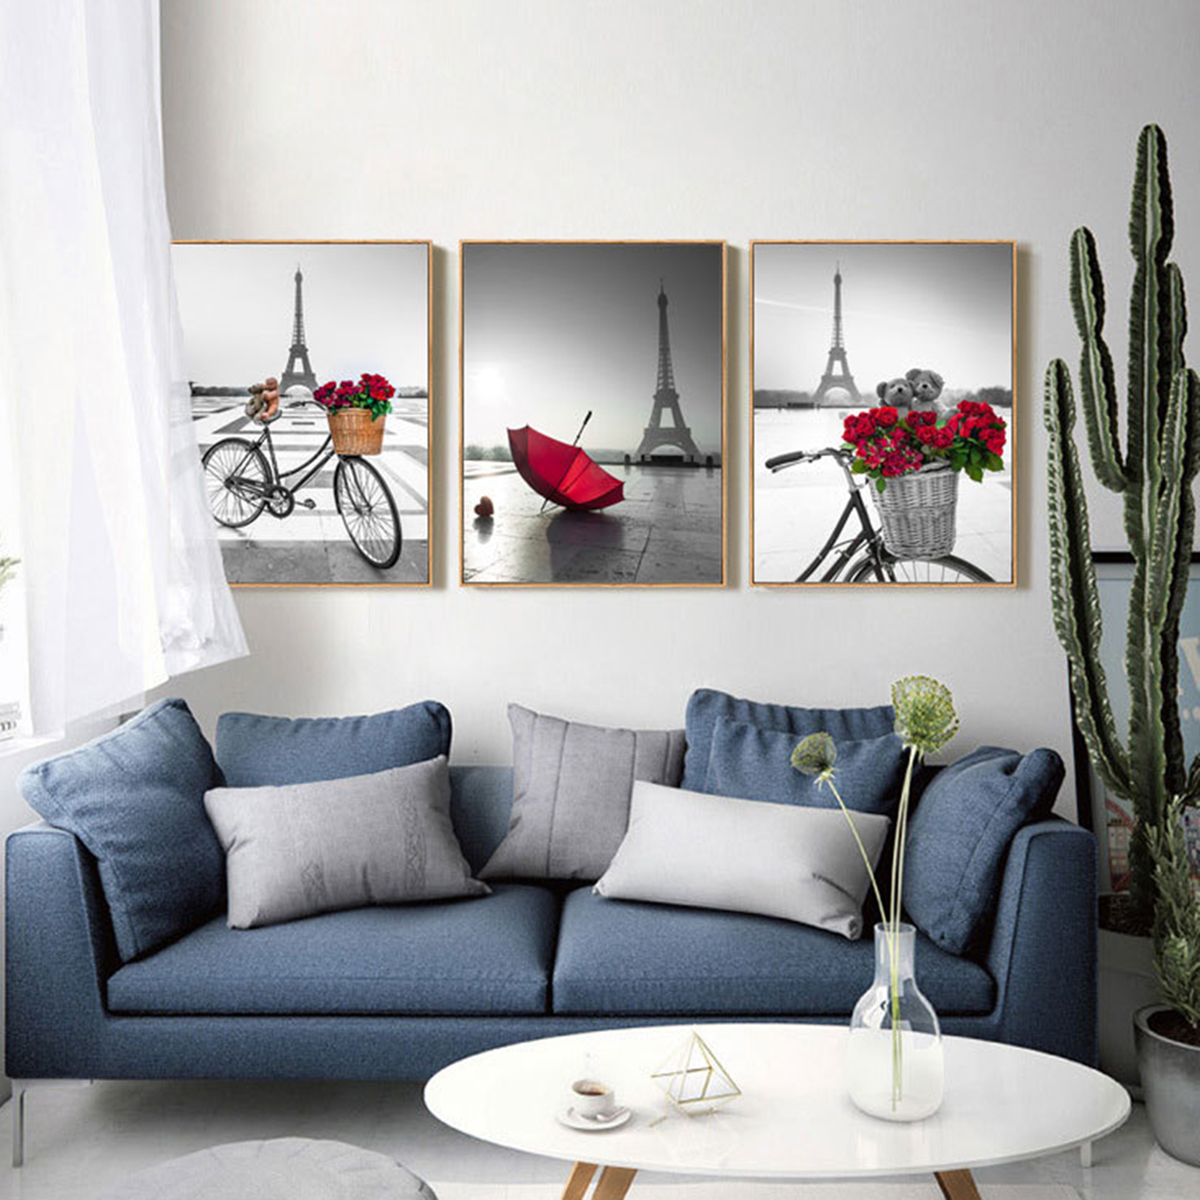 3Pcs-City-Scenery-Canvas-Paintings-Wall-Decorative-Print-Art-Pictures-Unframed-Wall-Hanging-Home-Off-1783981-5